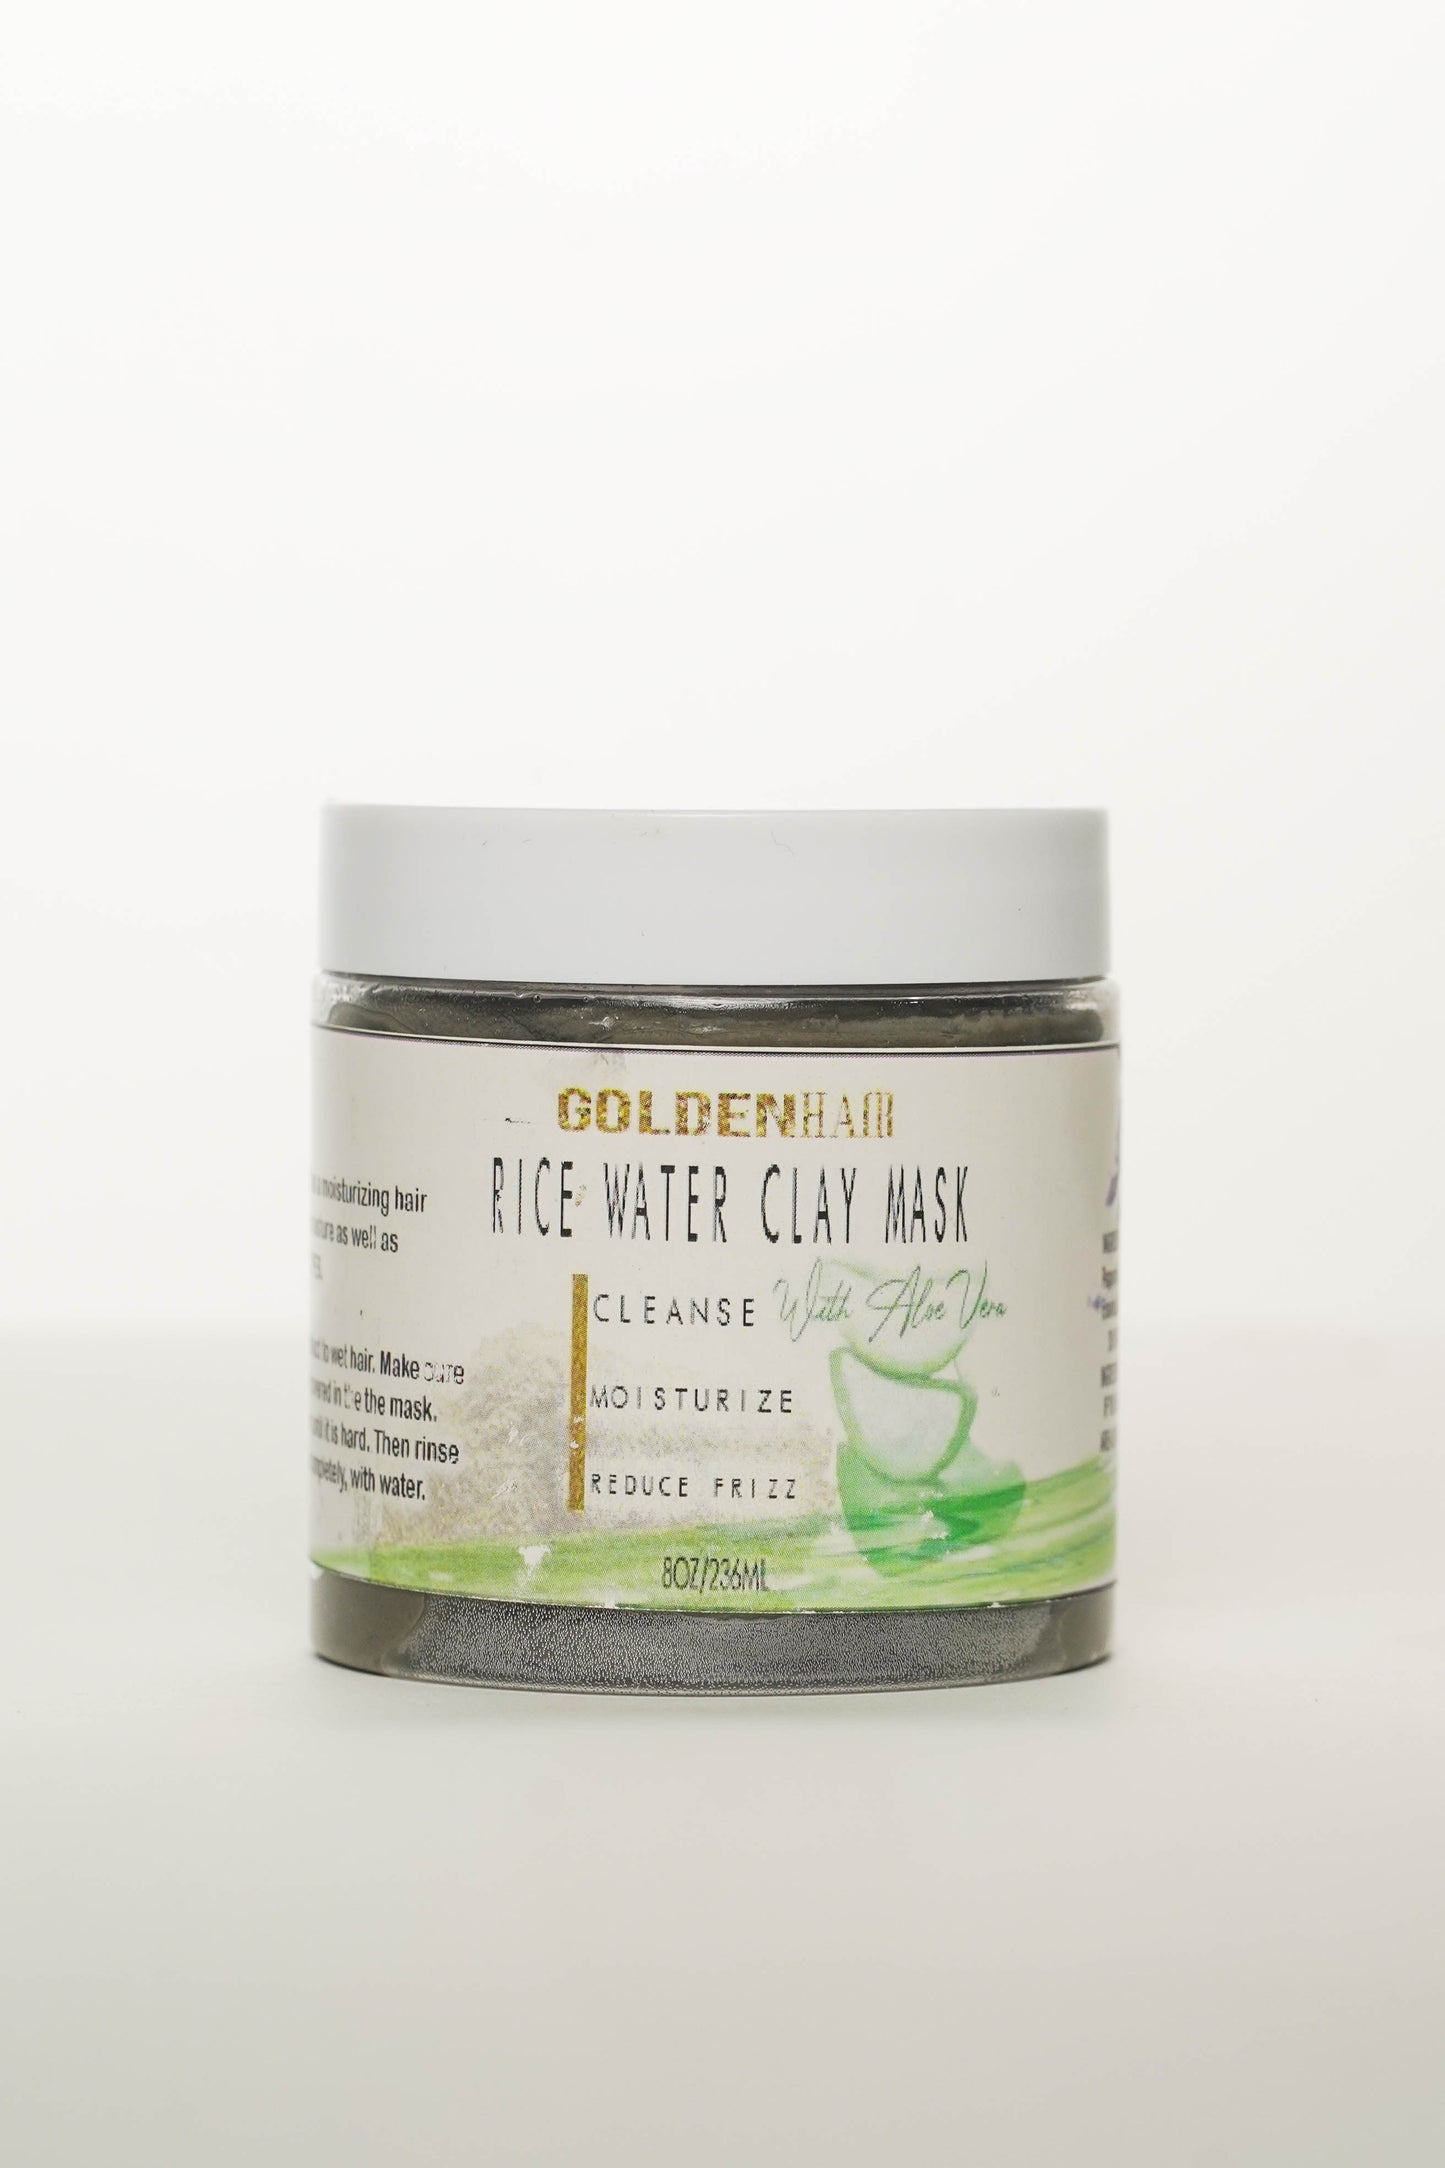 Rice Water Clay Mask With Aloe Vera